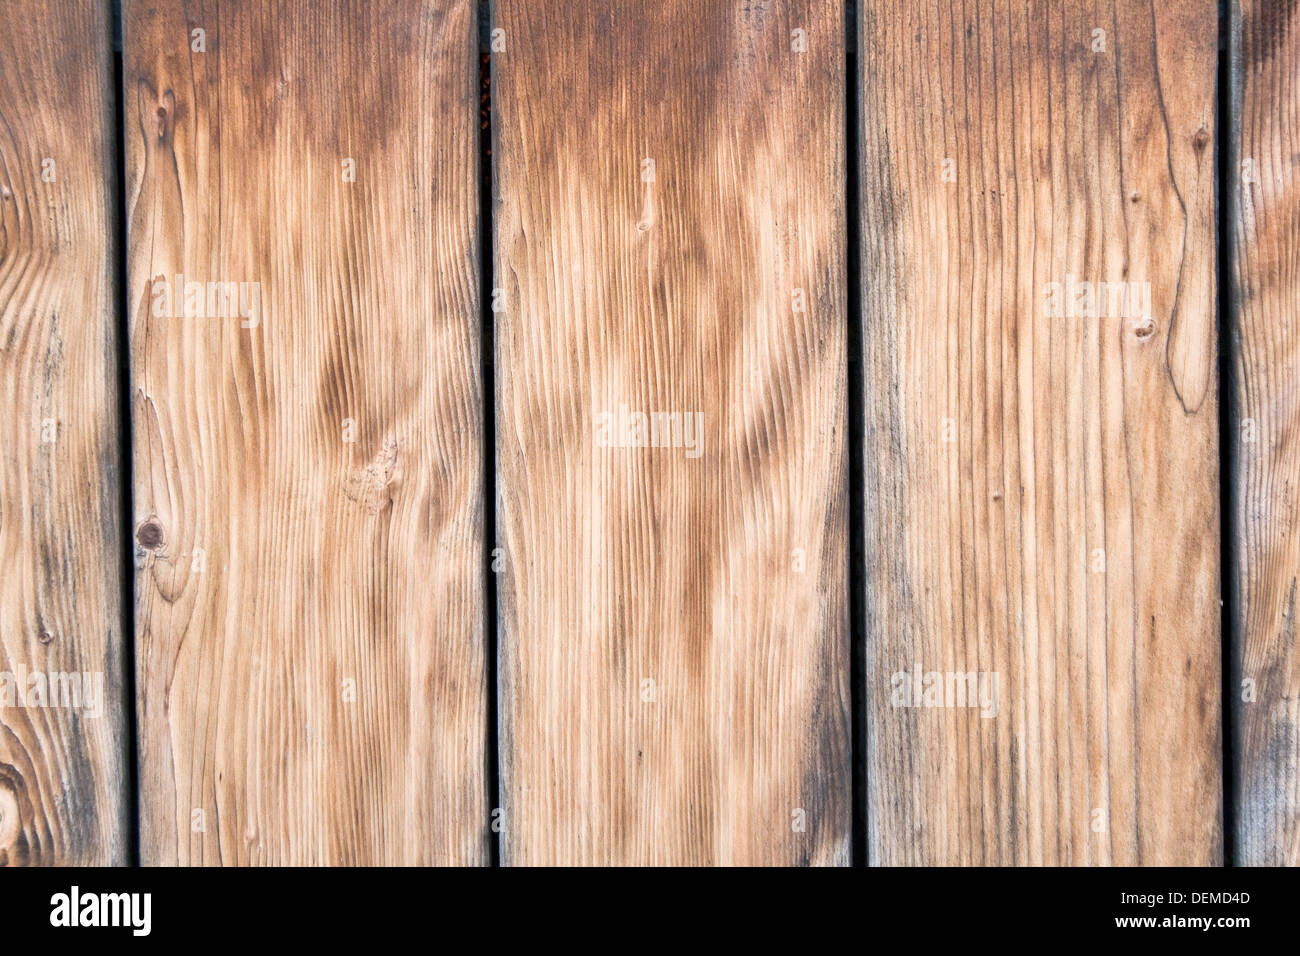 Old wooden background with boards Stock Photo